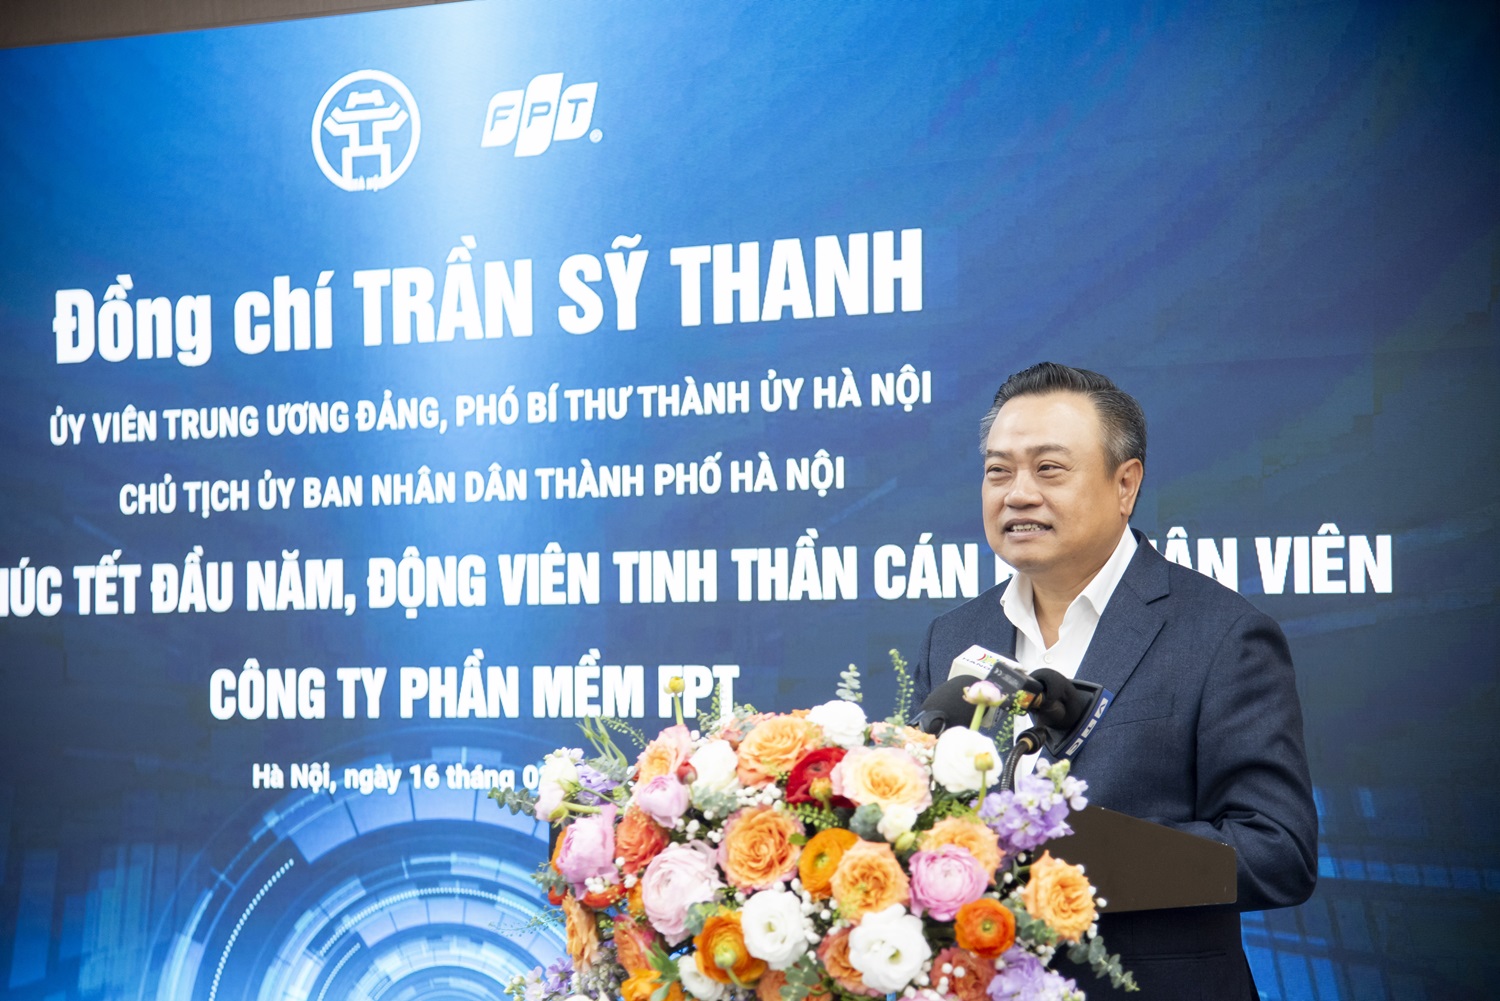 Mr. Tran Sy Thanh, a Member of the Party Central Committee, Deputy Secretary of the Hanoi Party Committee, and Chairman of the Hanoi People's Committee, paid a visit and held discussions with FPT.